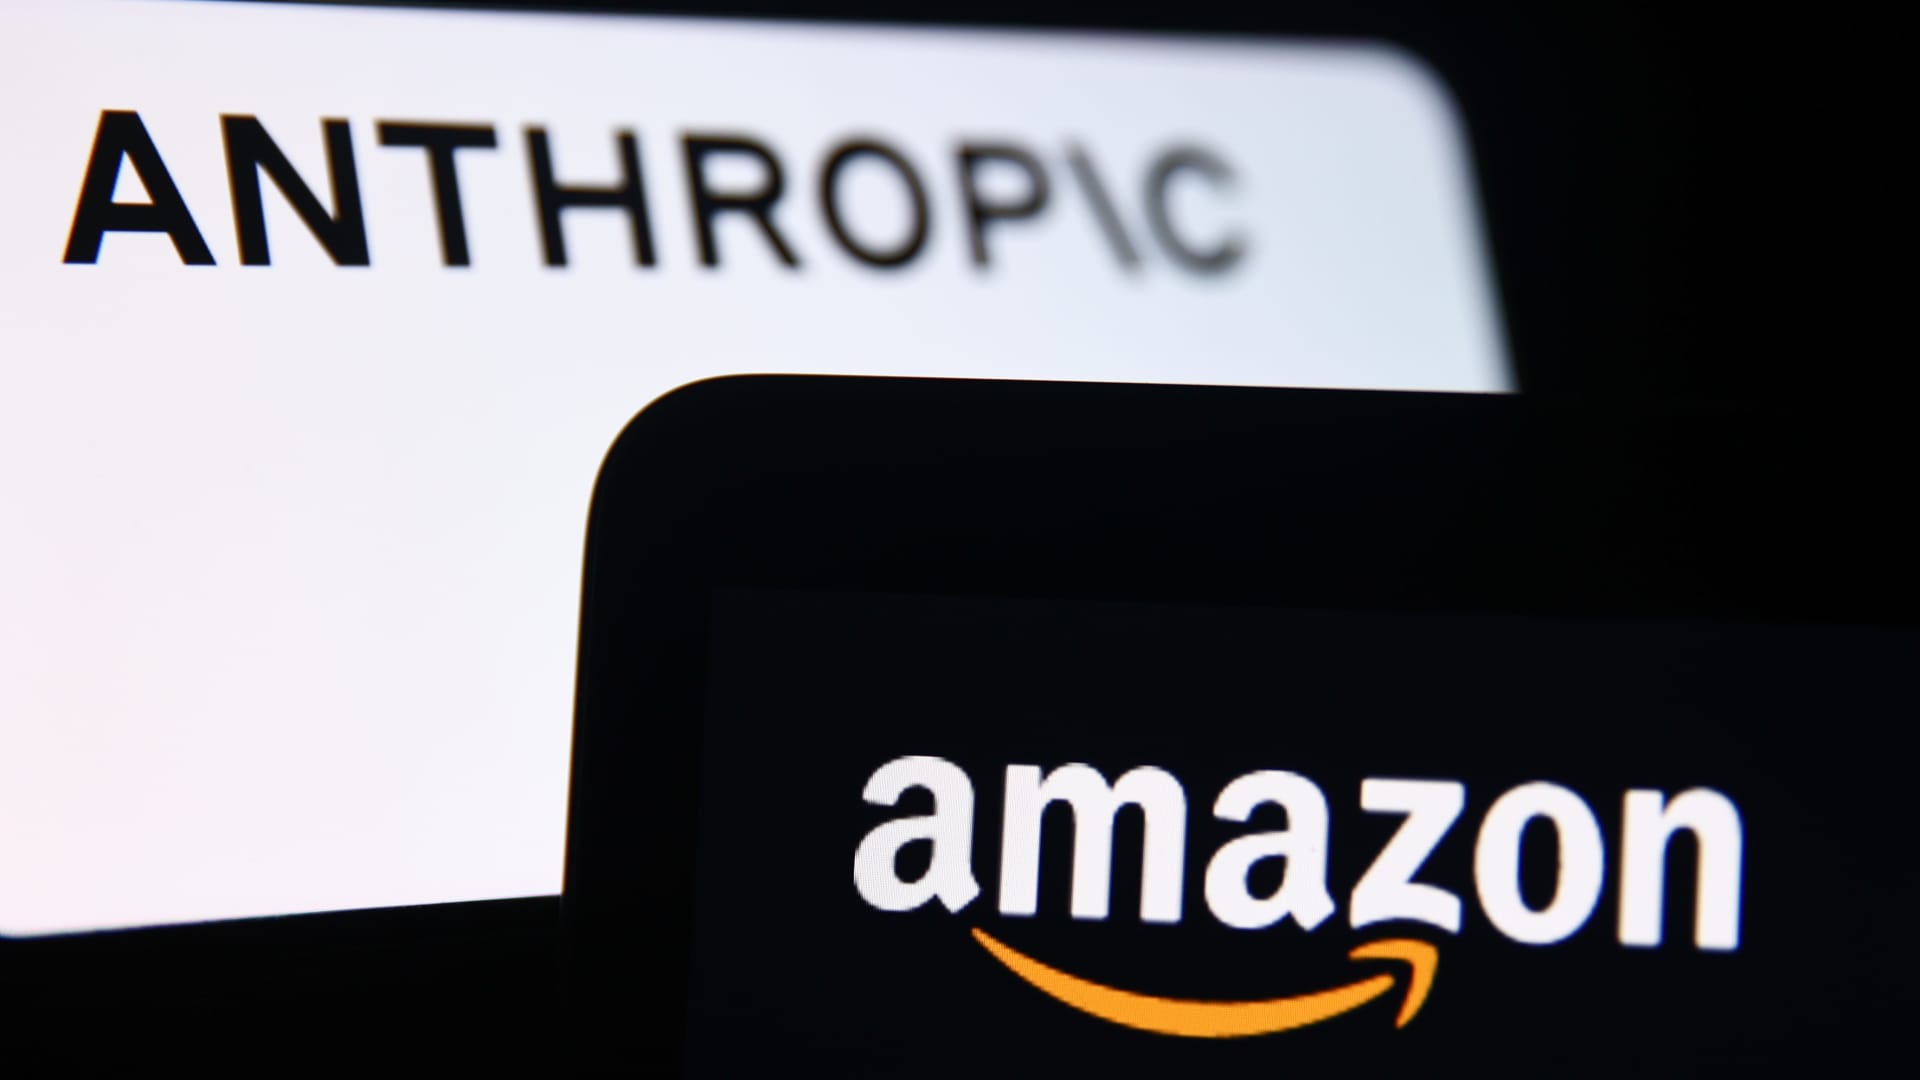 Amazon spends $2.75 billion on AI startup Anthropic in its largest venture investment yet (7 minute read)